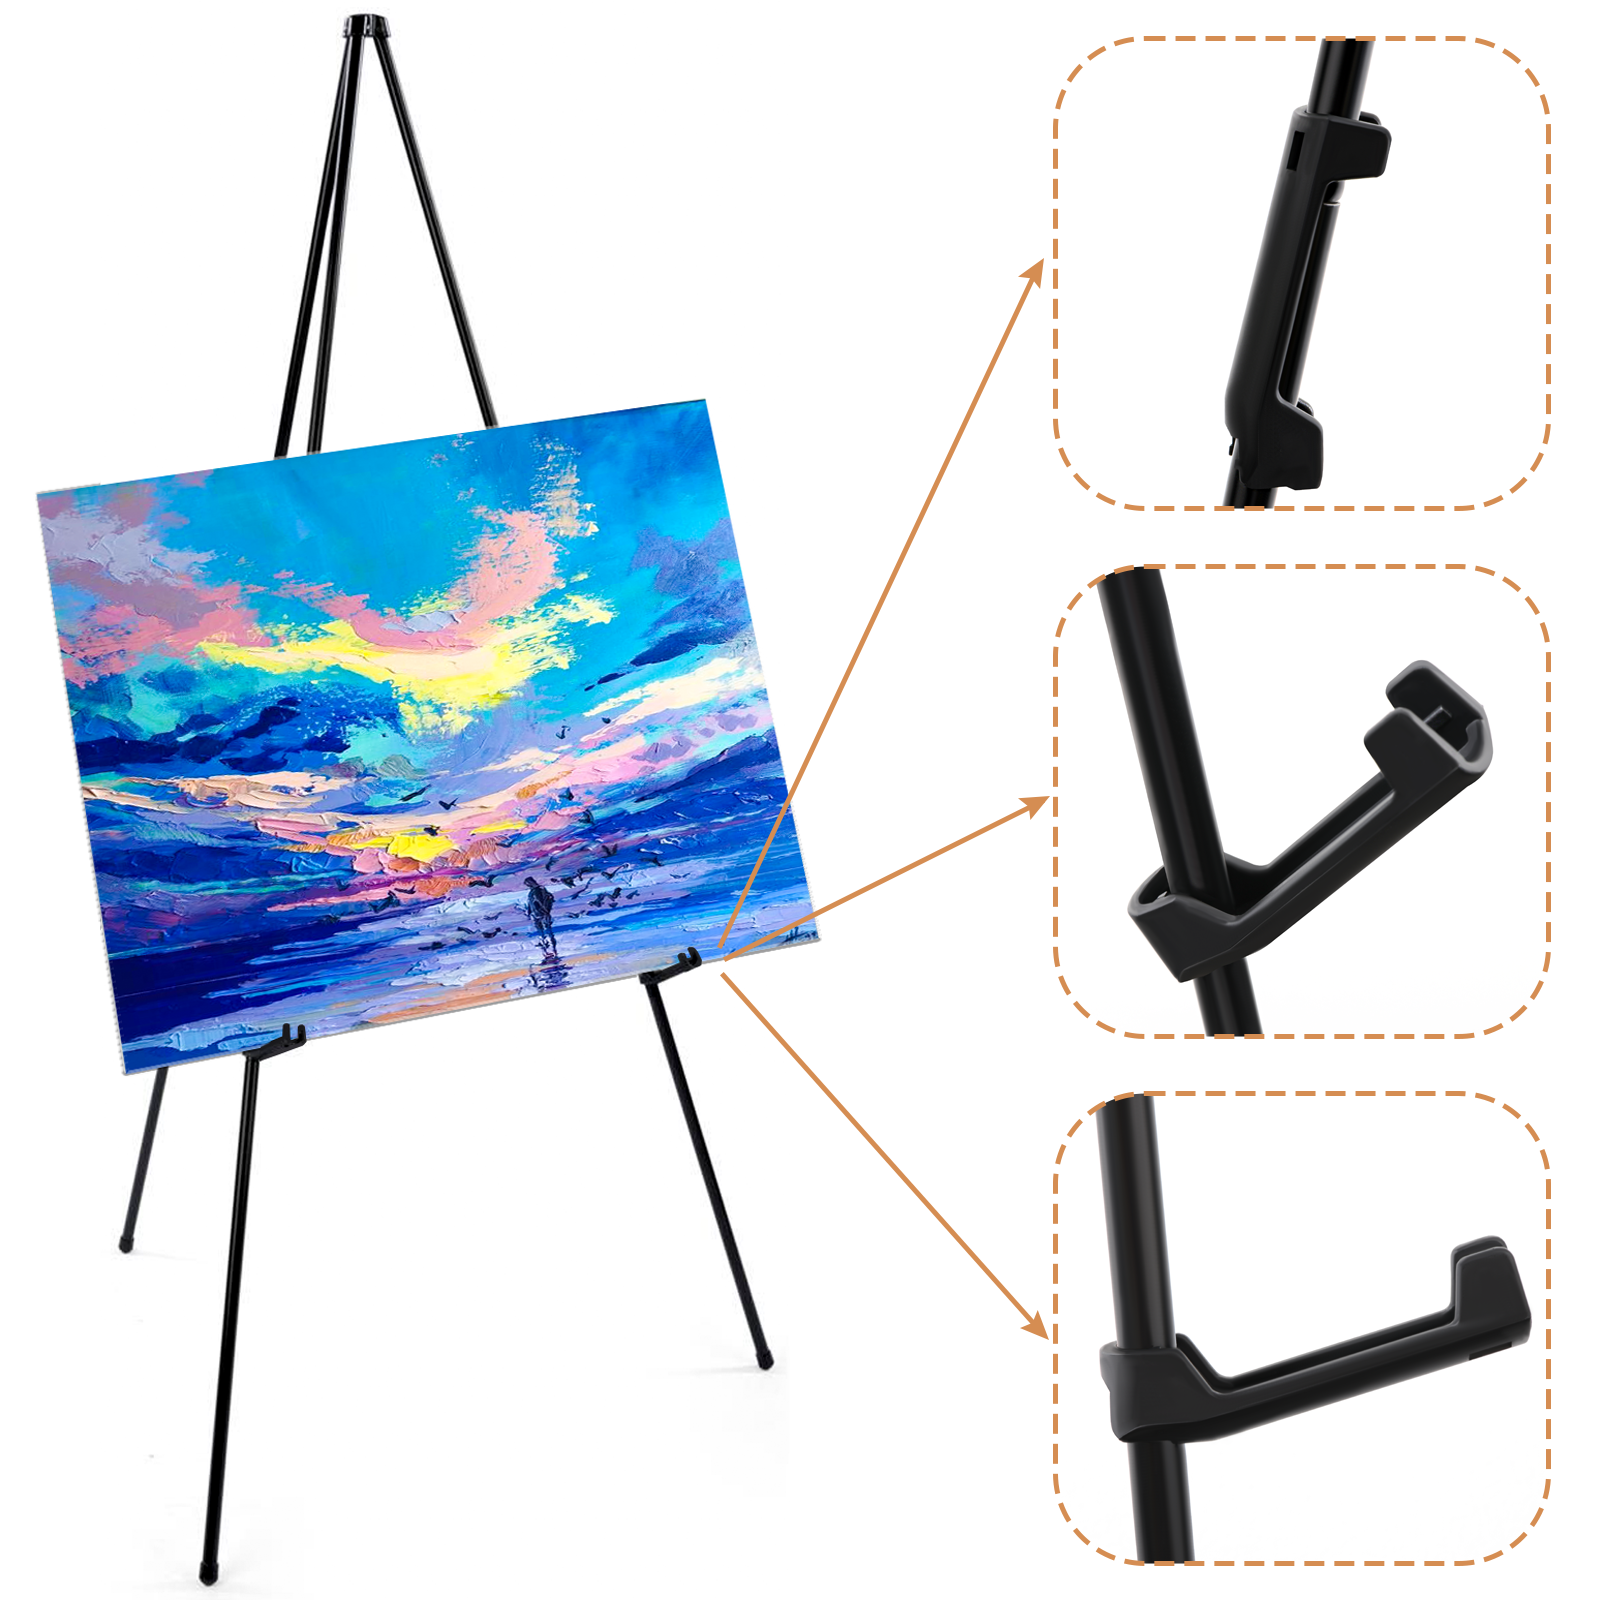 REALWAY 63 Folding Easel Stand for Display,Adjustable Floor Poster Easel  for Arts,Pictures,Paintings,Telescoping Black Metal Easel Fit for Signs at